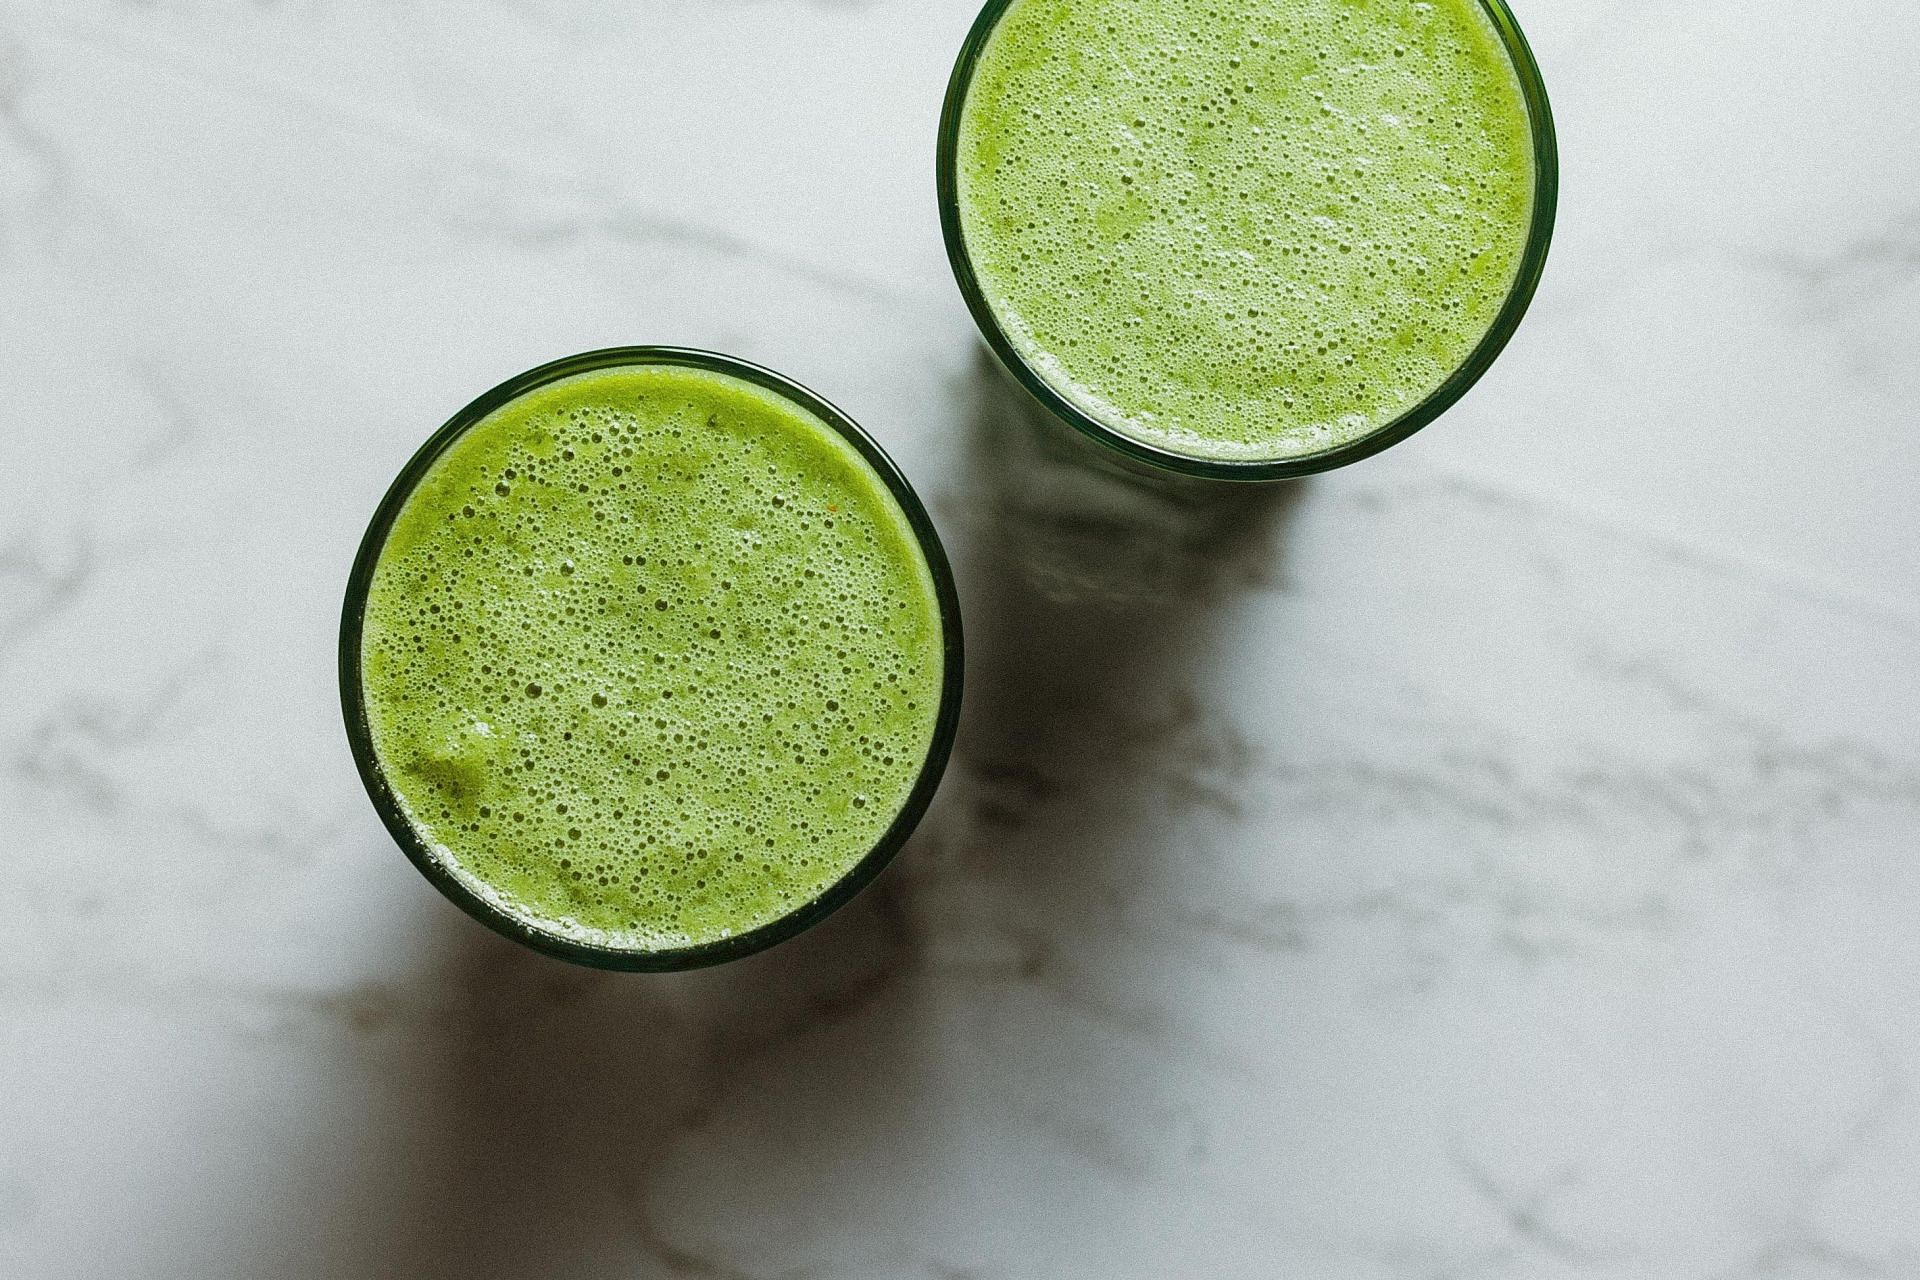 There is some evidence that celery juice may be able to help you sleep better as well (Image via Unsplash @Alex Lvrs)